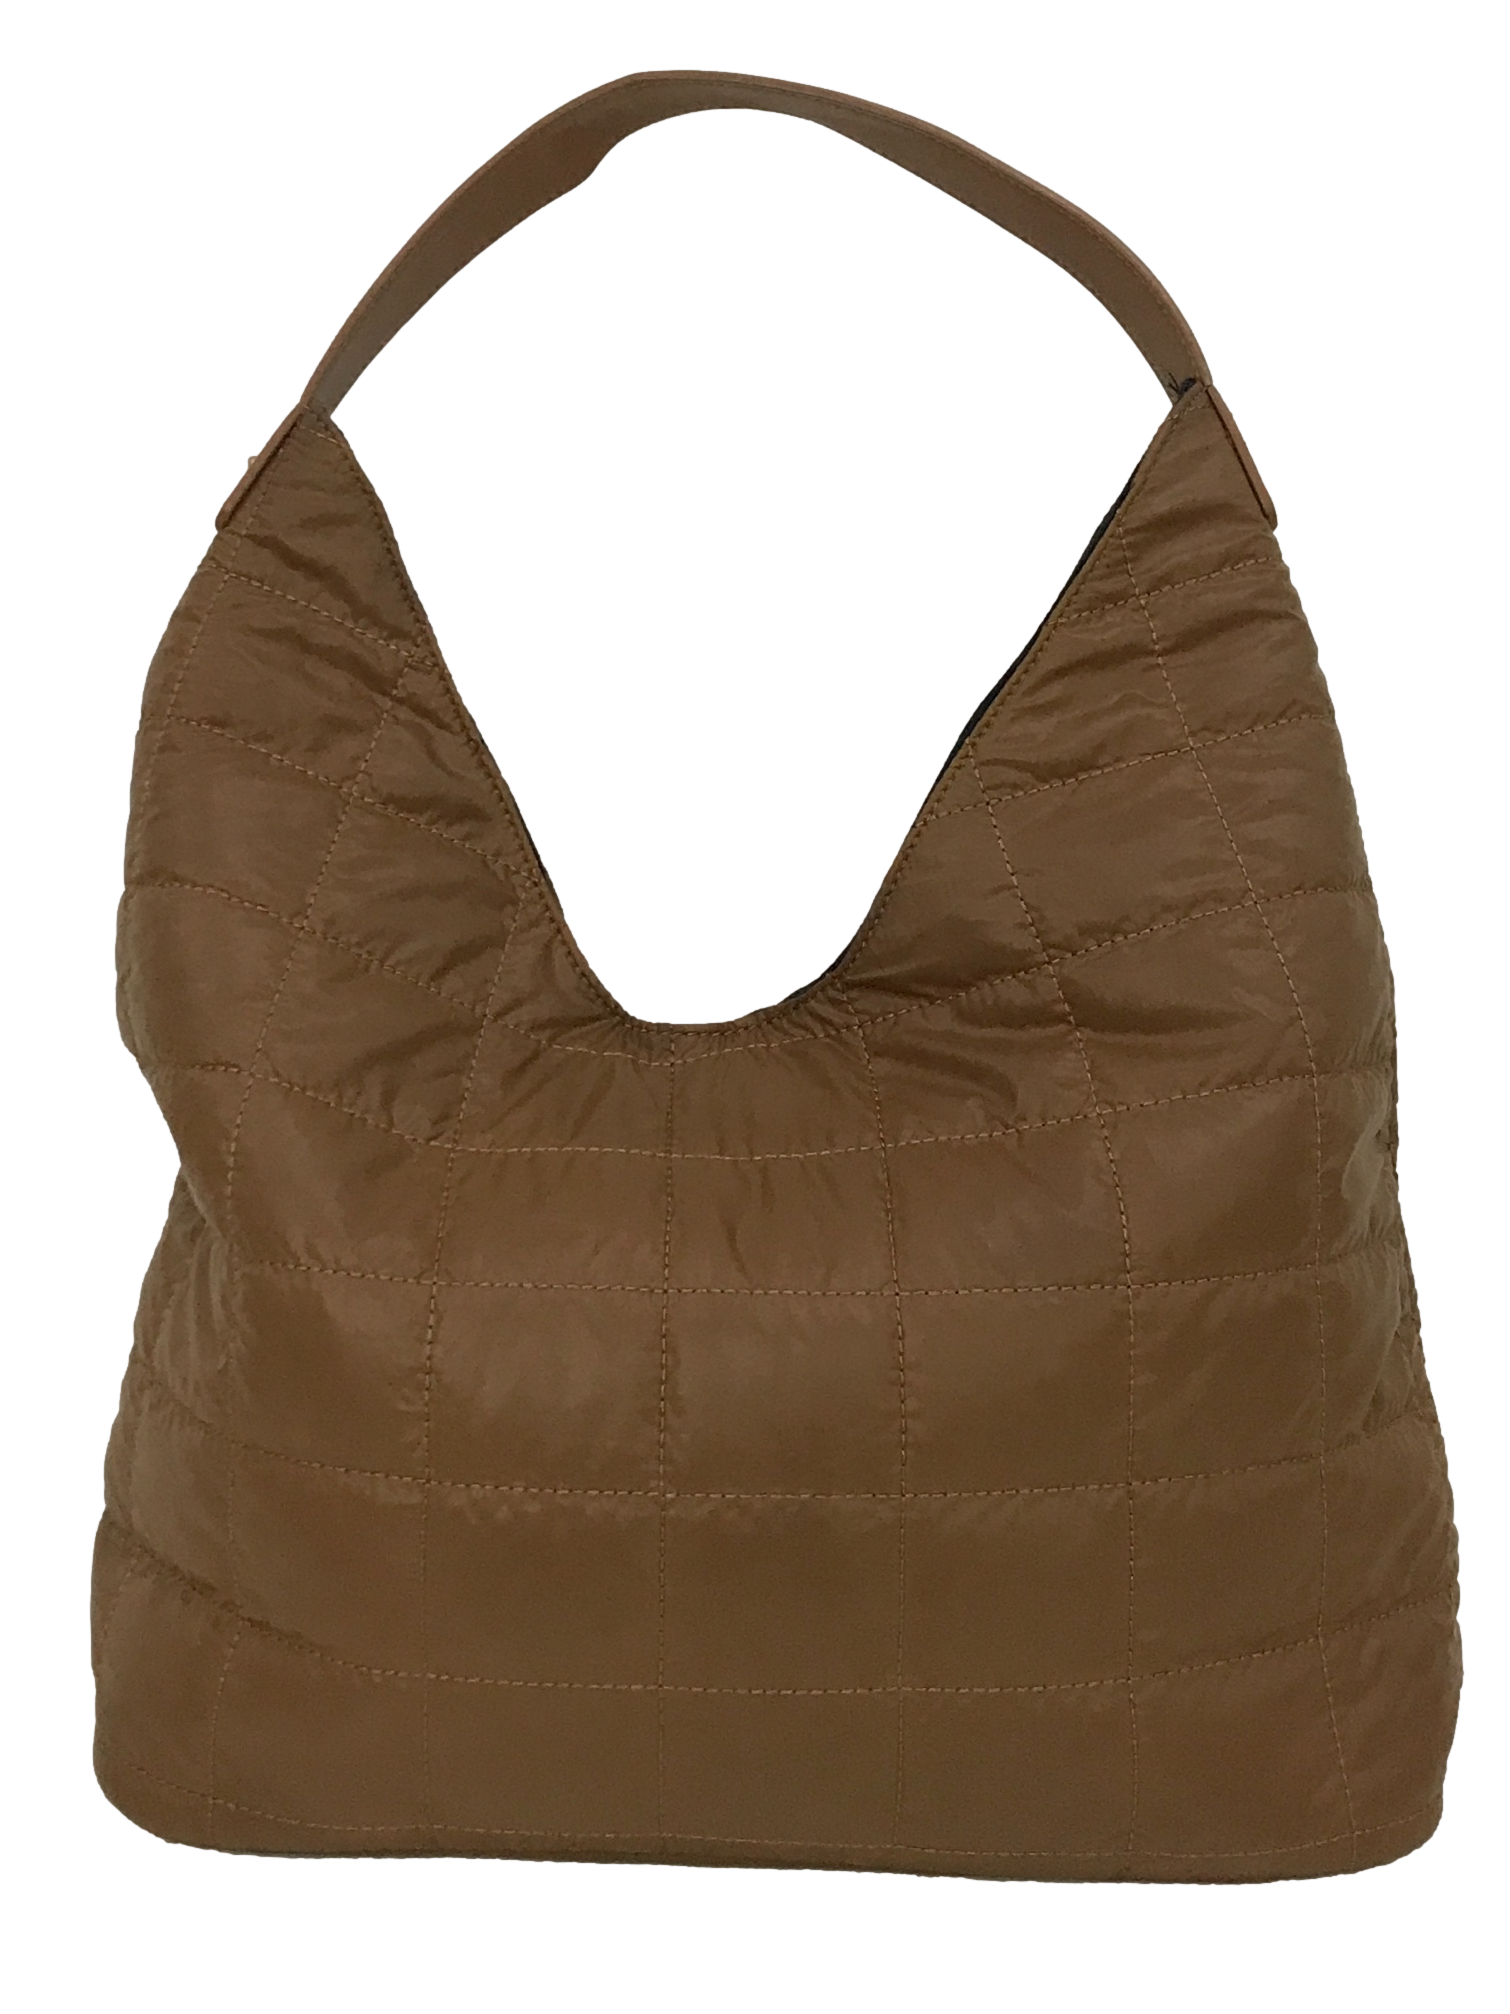 Brown Quilted Handbag